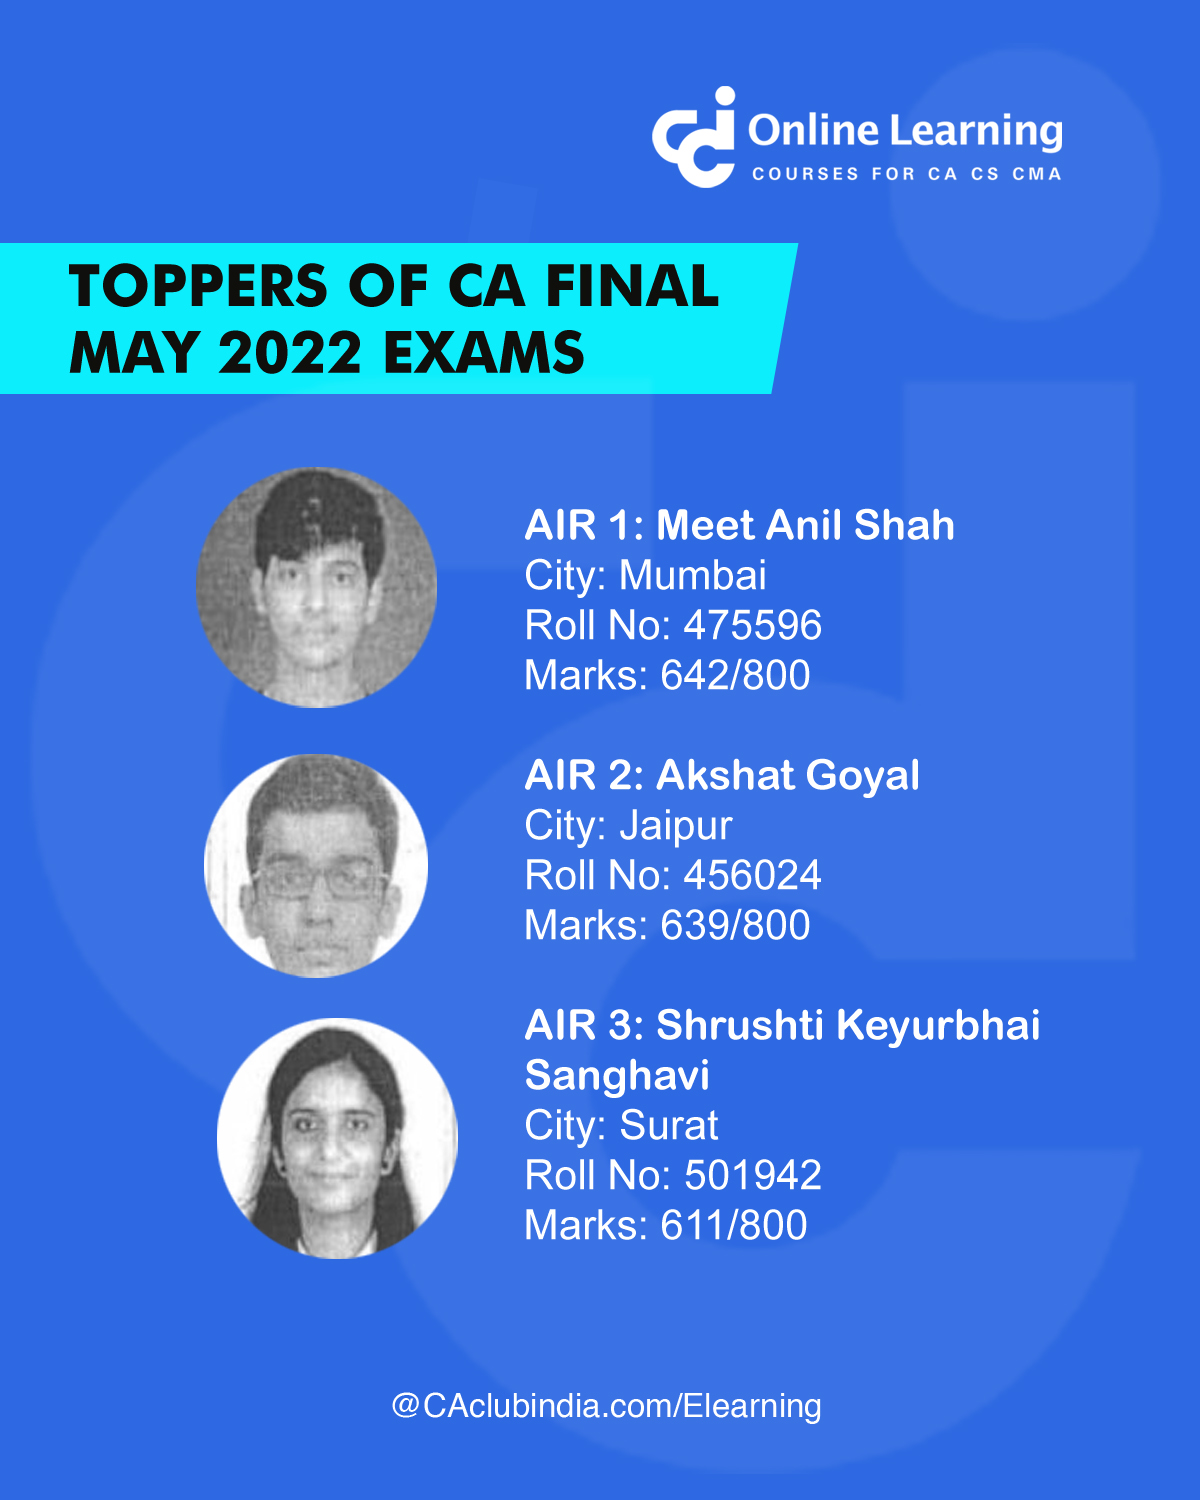 Toppers of CA Final Examination held in May 2022 Exams